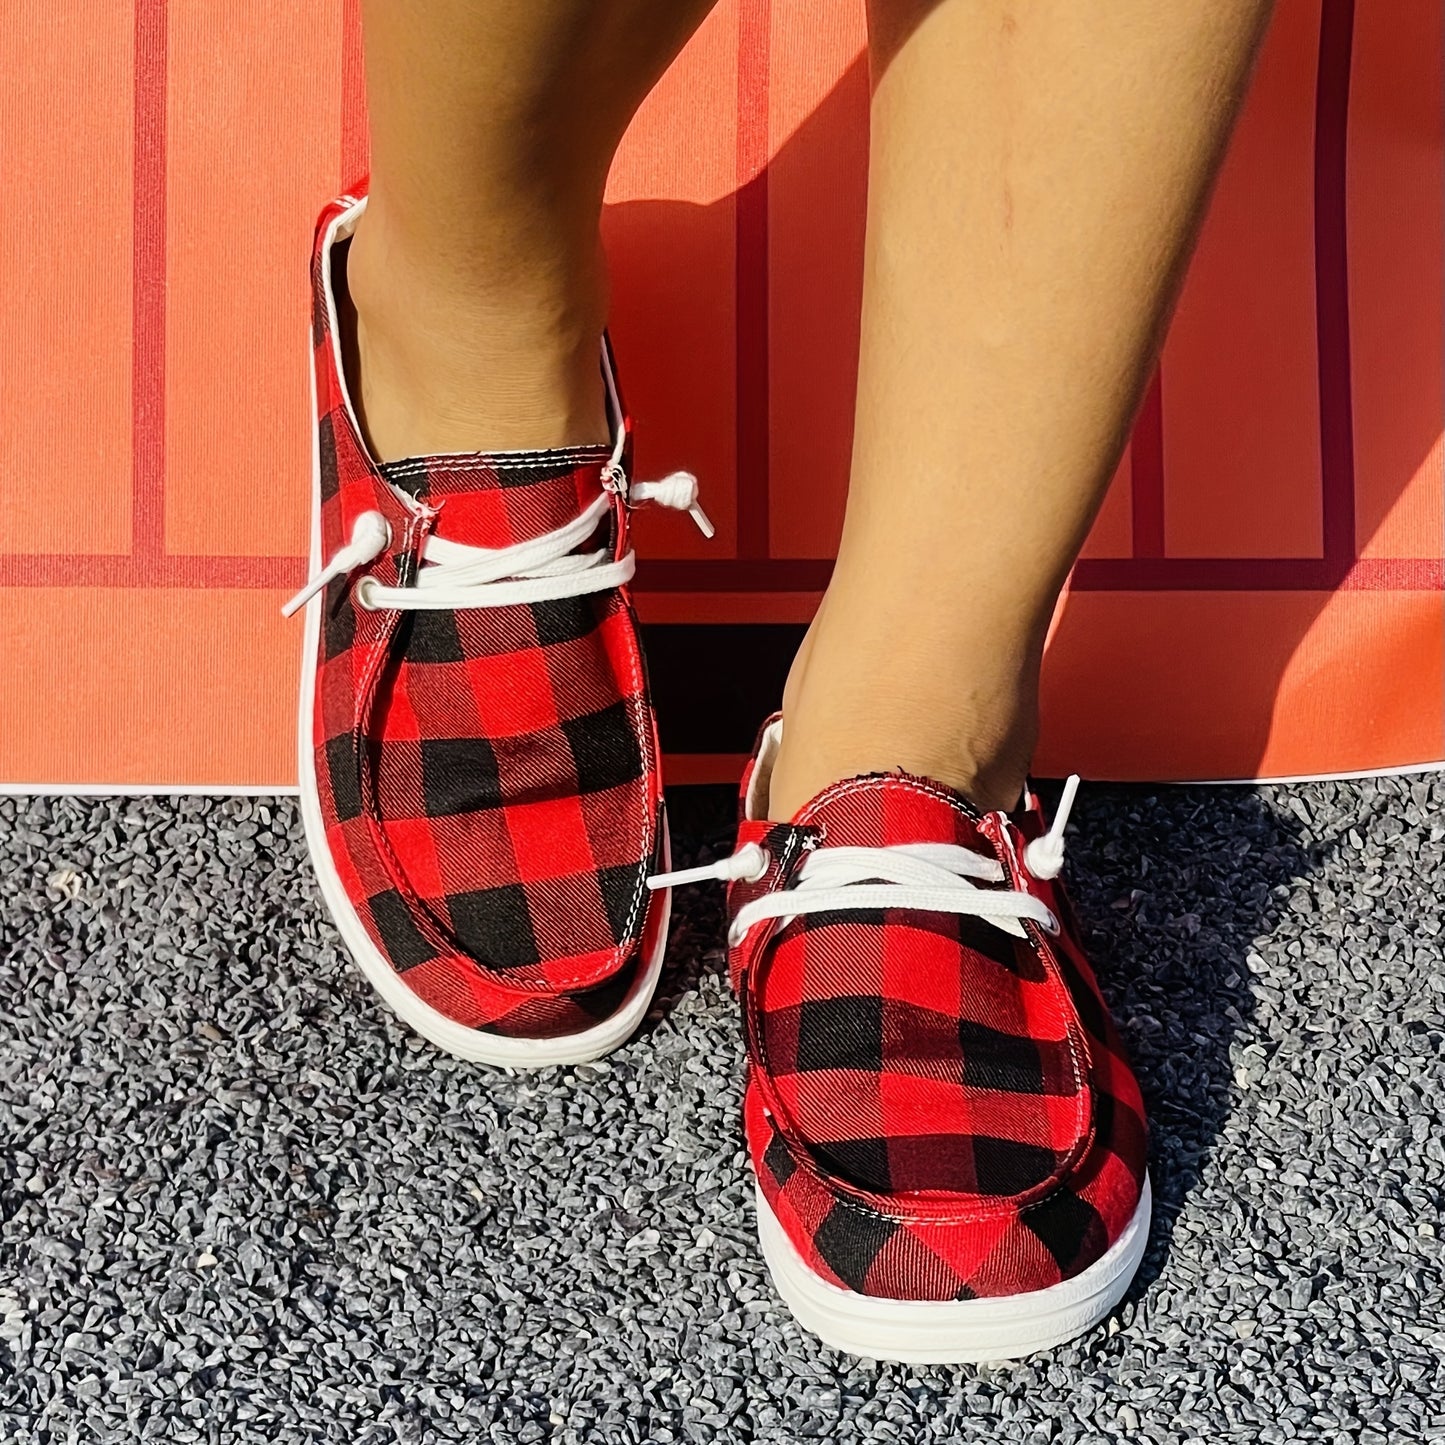 Women's Red Plaid Pattern Canvas Sneakers, Casual Lace Up Low Top Flat Shoes, Lightweight Walking Shoes